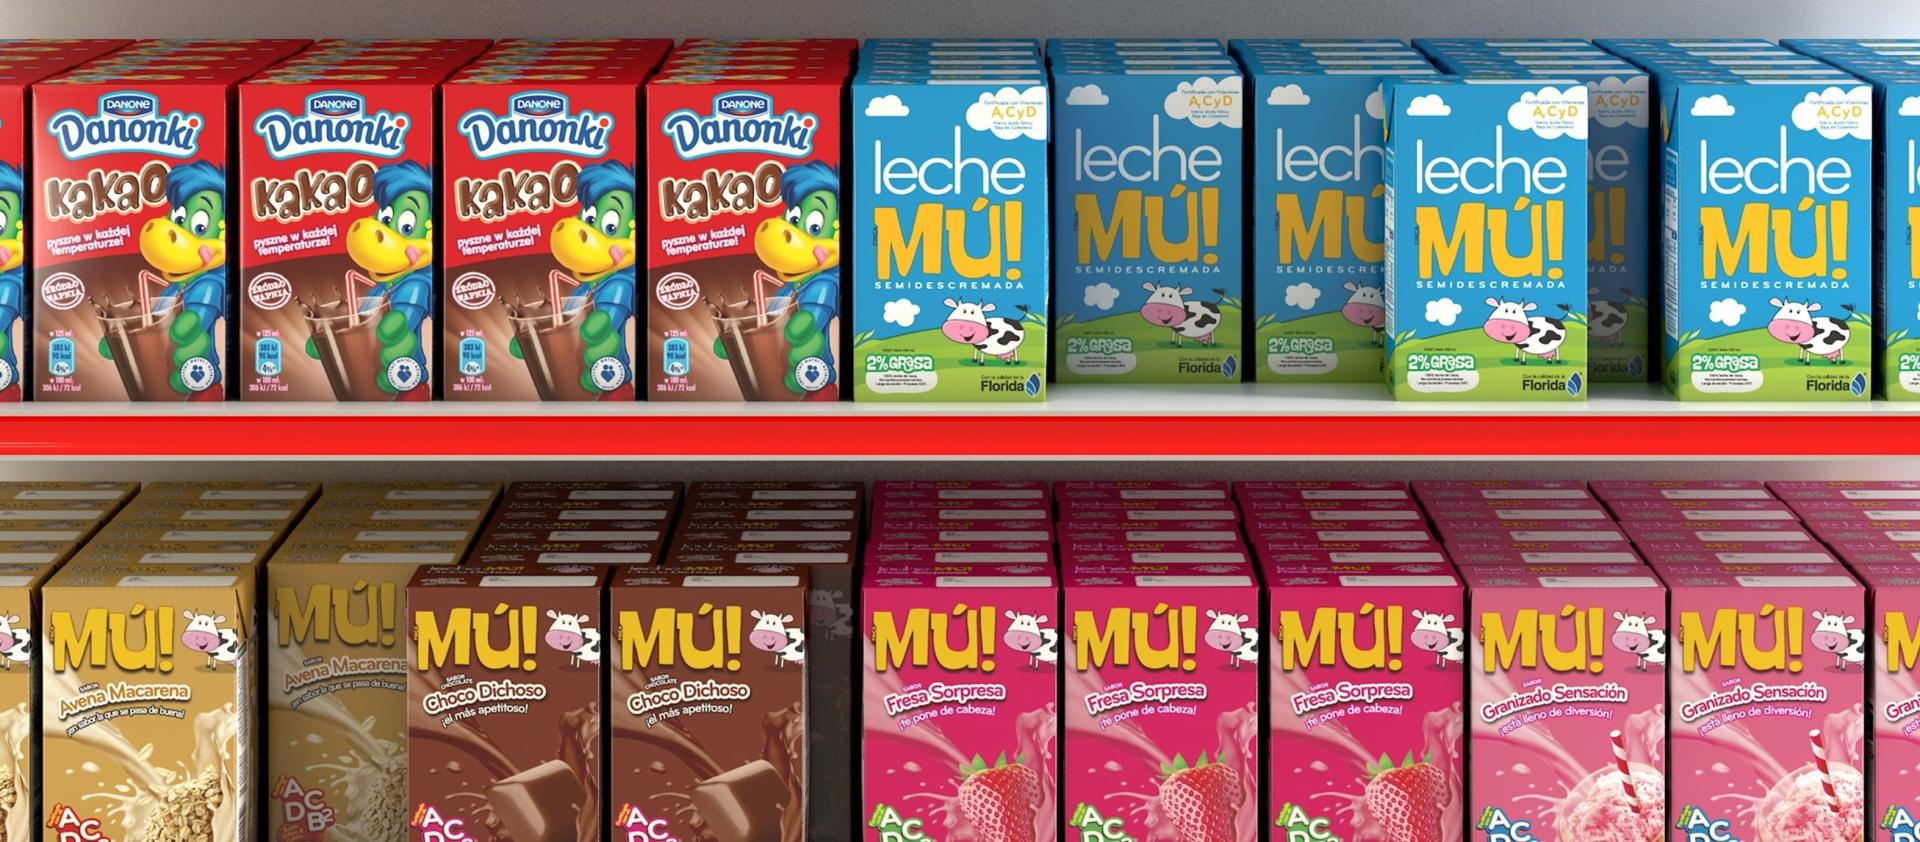 UHT Milk and Dairy products filled in IPI aseptic carton packaging